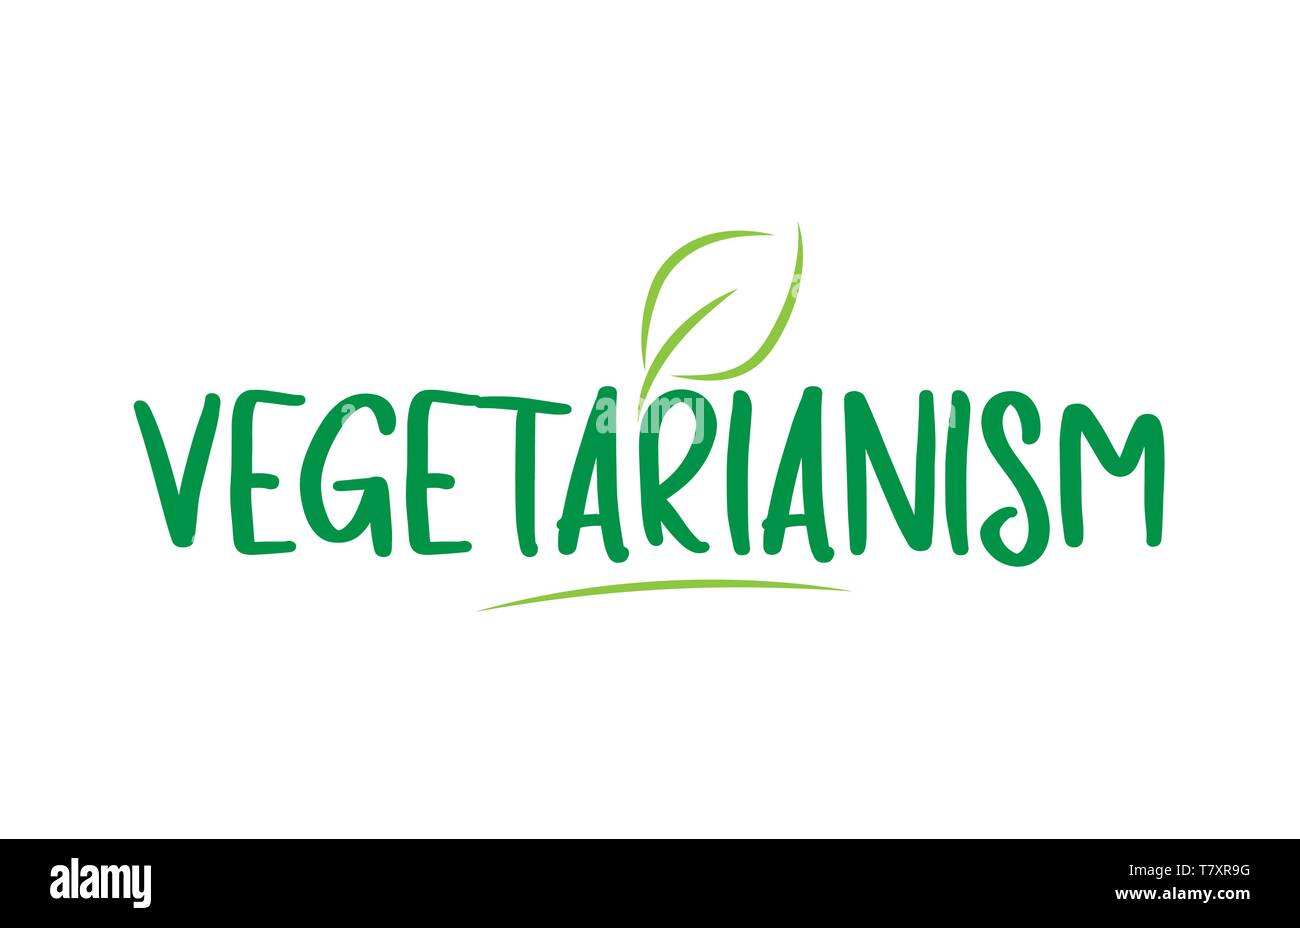 vegetarianism green word text with leaf suitable for icon, badge or typography logo design Stock Vector